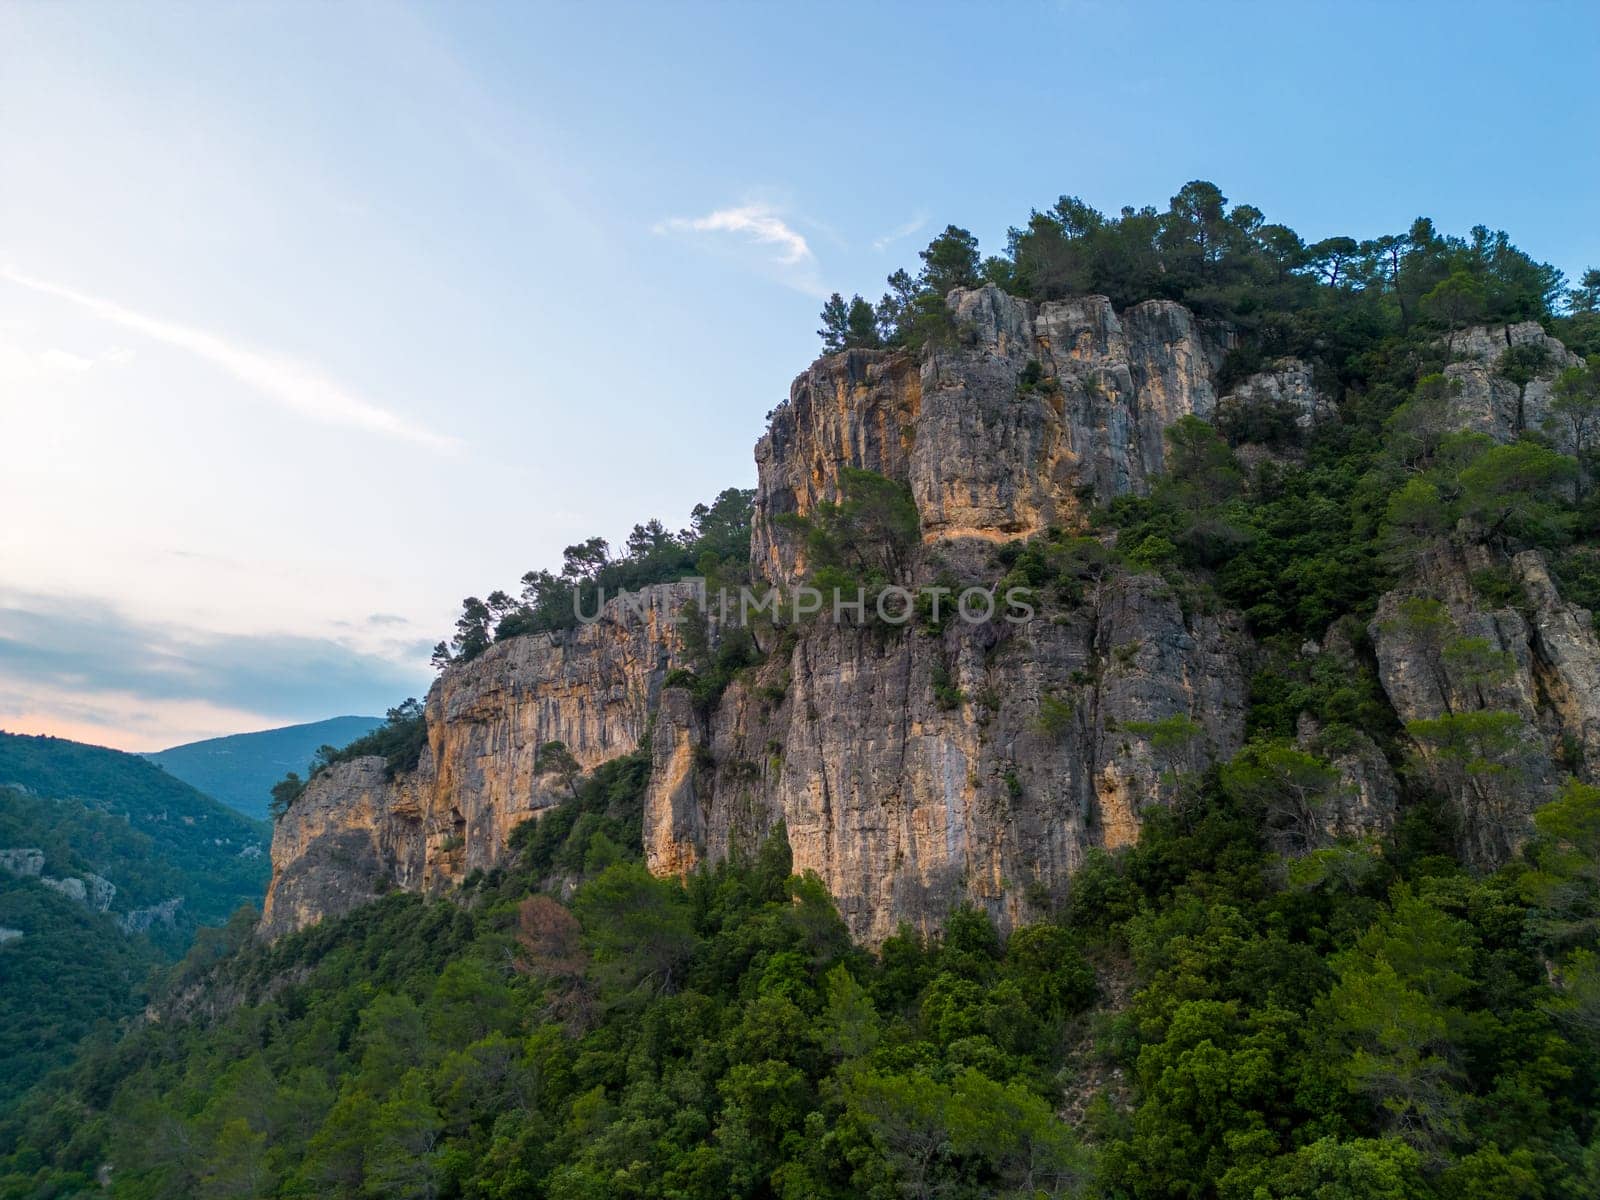 Steep rocky cliffs over forested landscape at golden hour. High quality photo